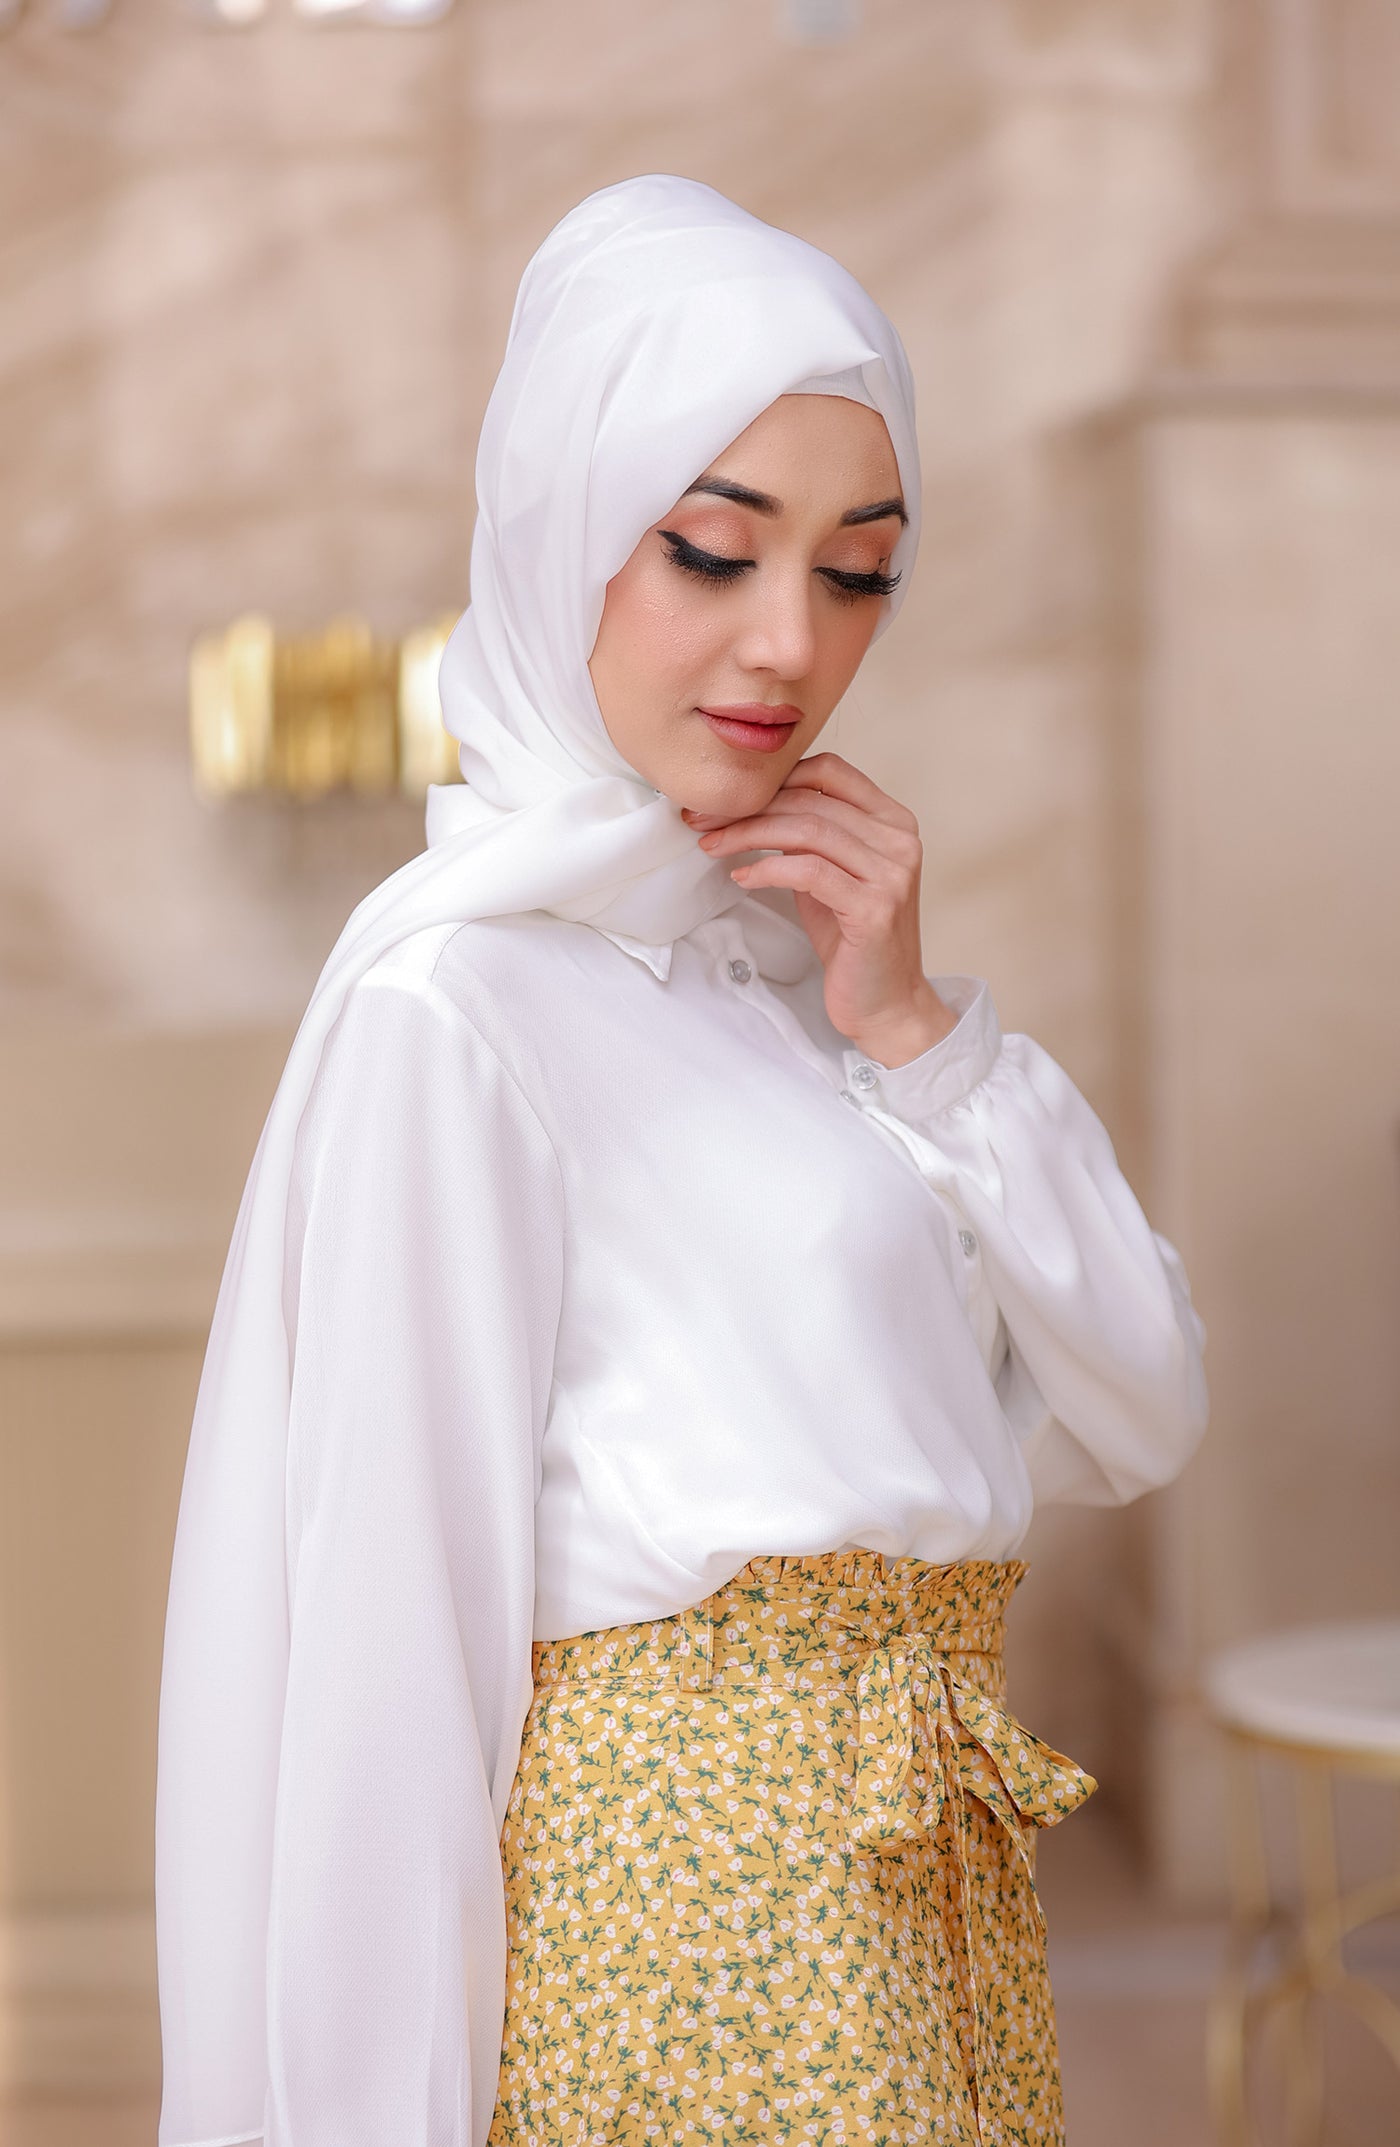 ladies skirt with white hijab & top in pakistan